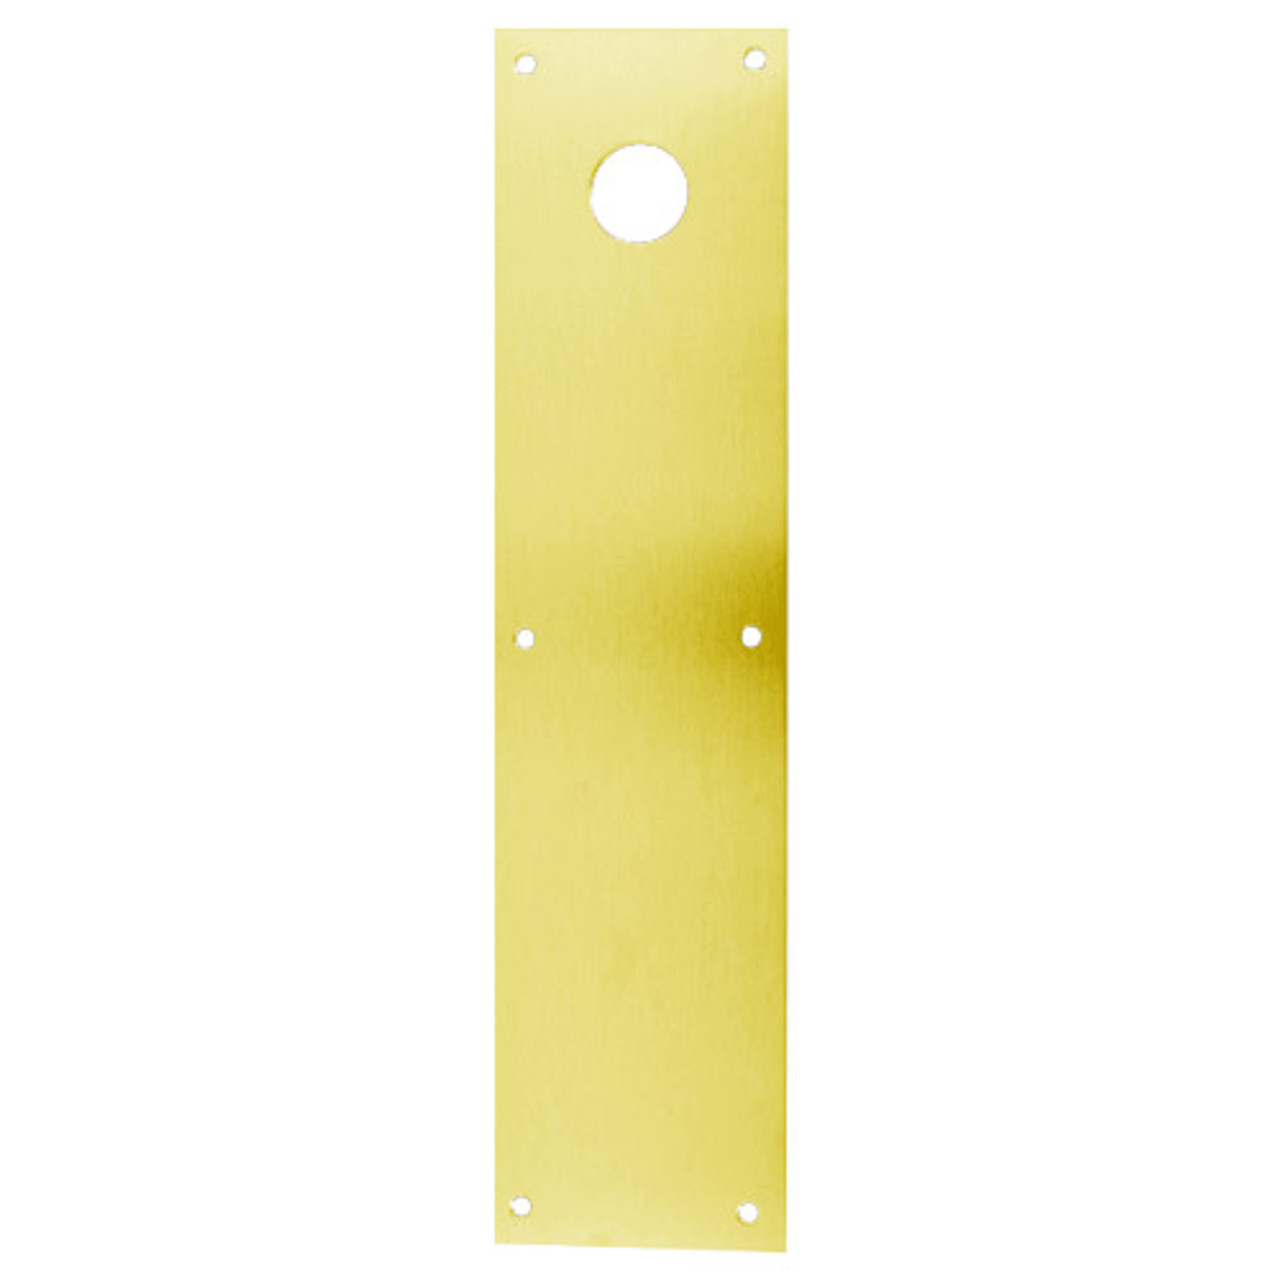 CFD71-605 Don Jo Push Plates with Holes in Bright Brass Finish